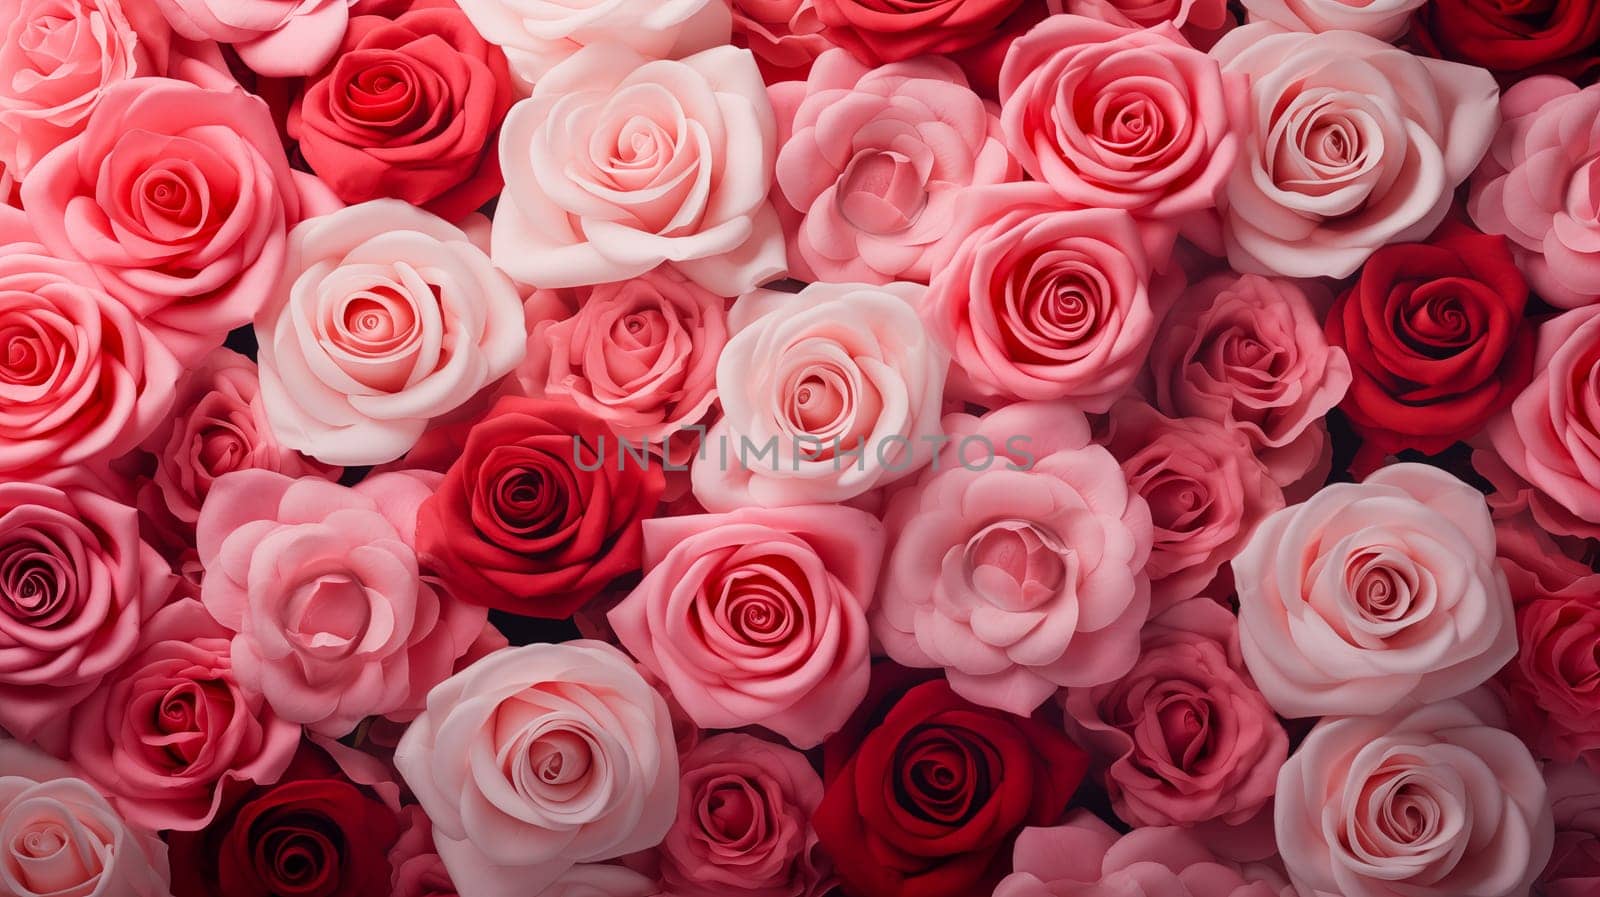 Valentine day background of close-up view of a beautiful mix of pink, red and white roses, symbolizing love and affection, perfect for Valentine Day celebrations